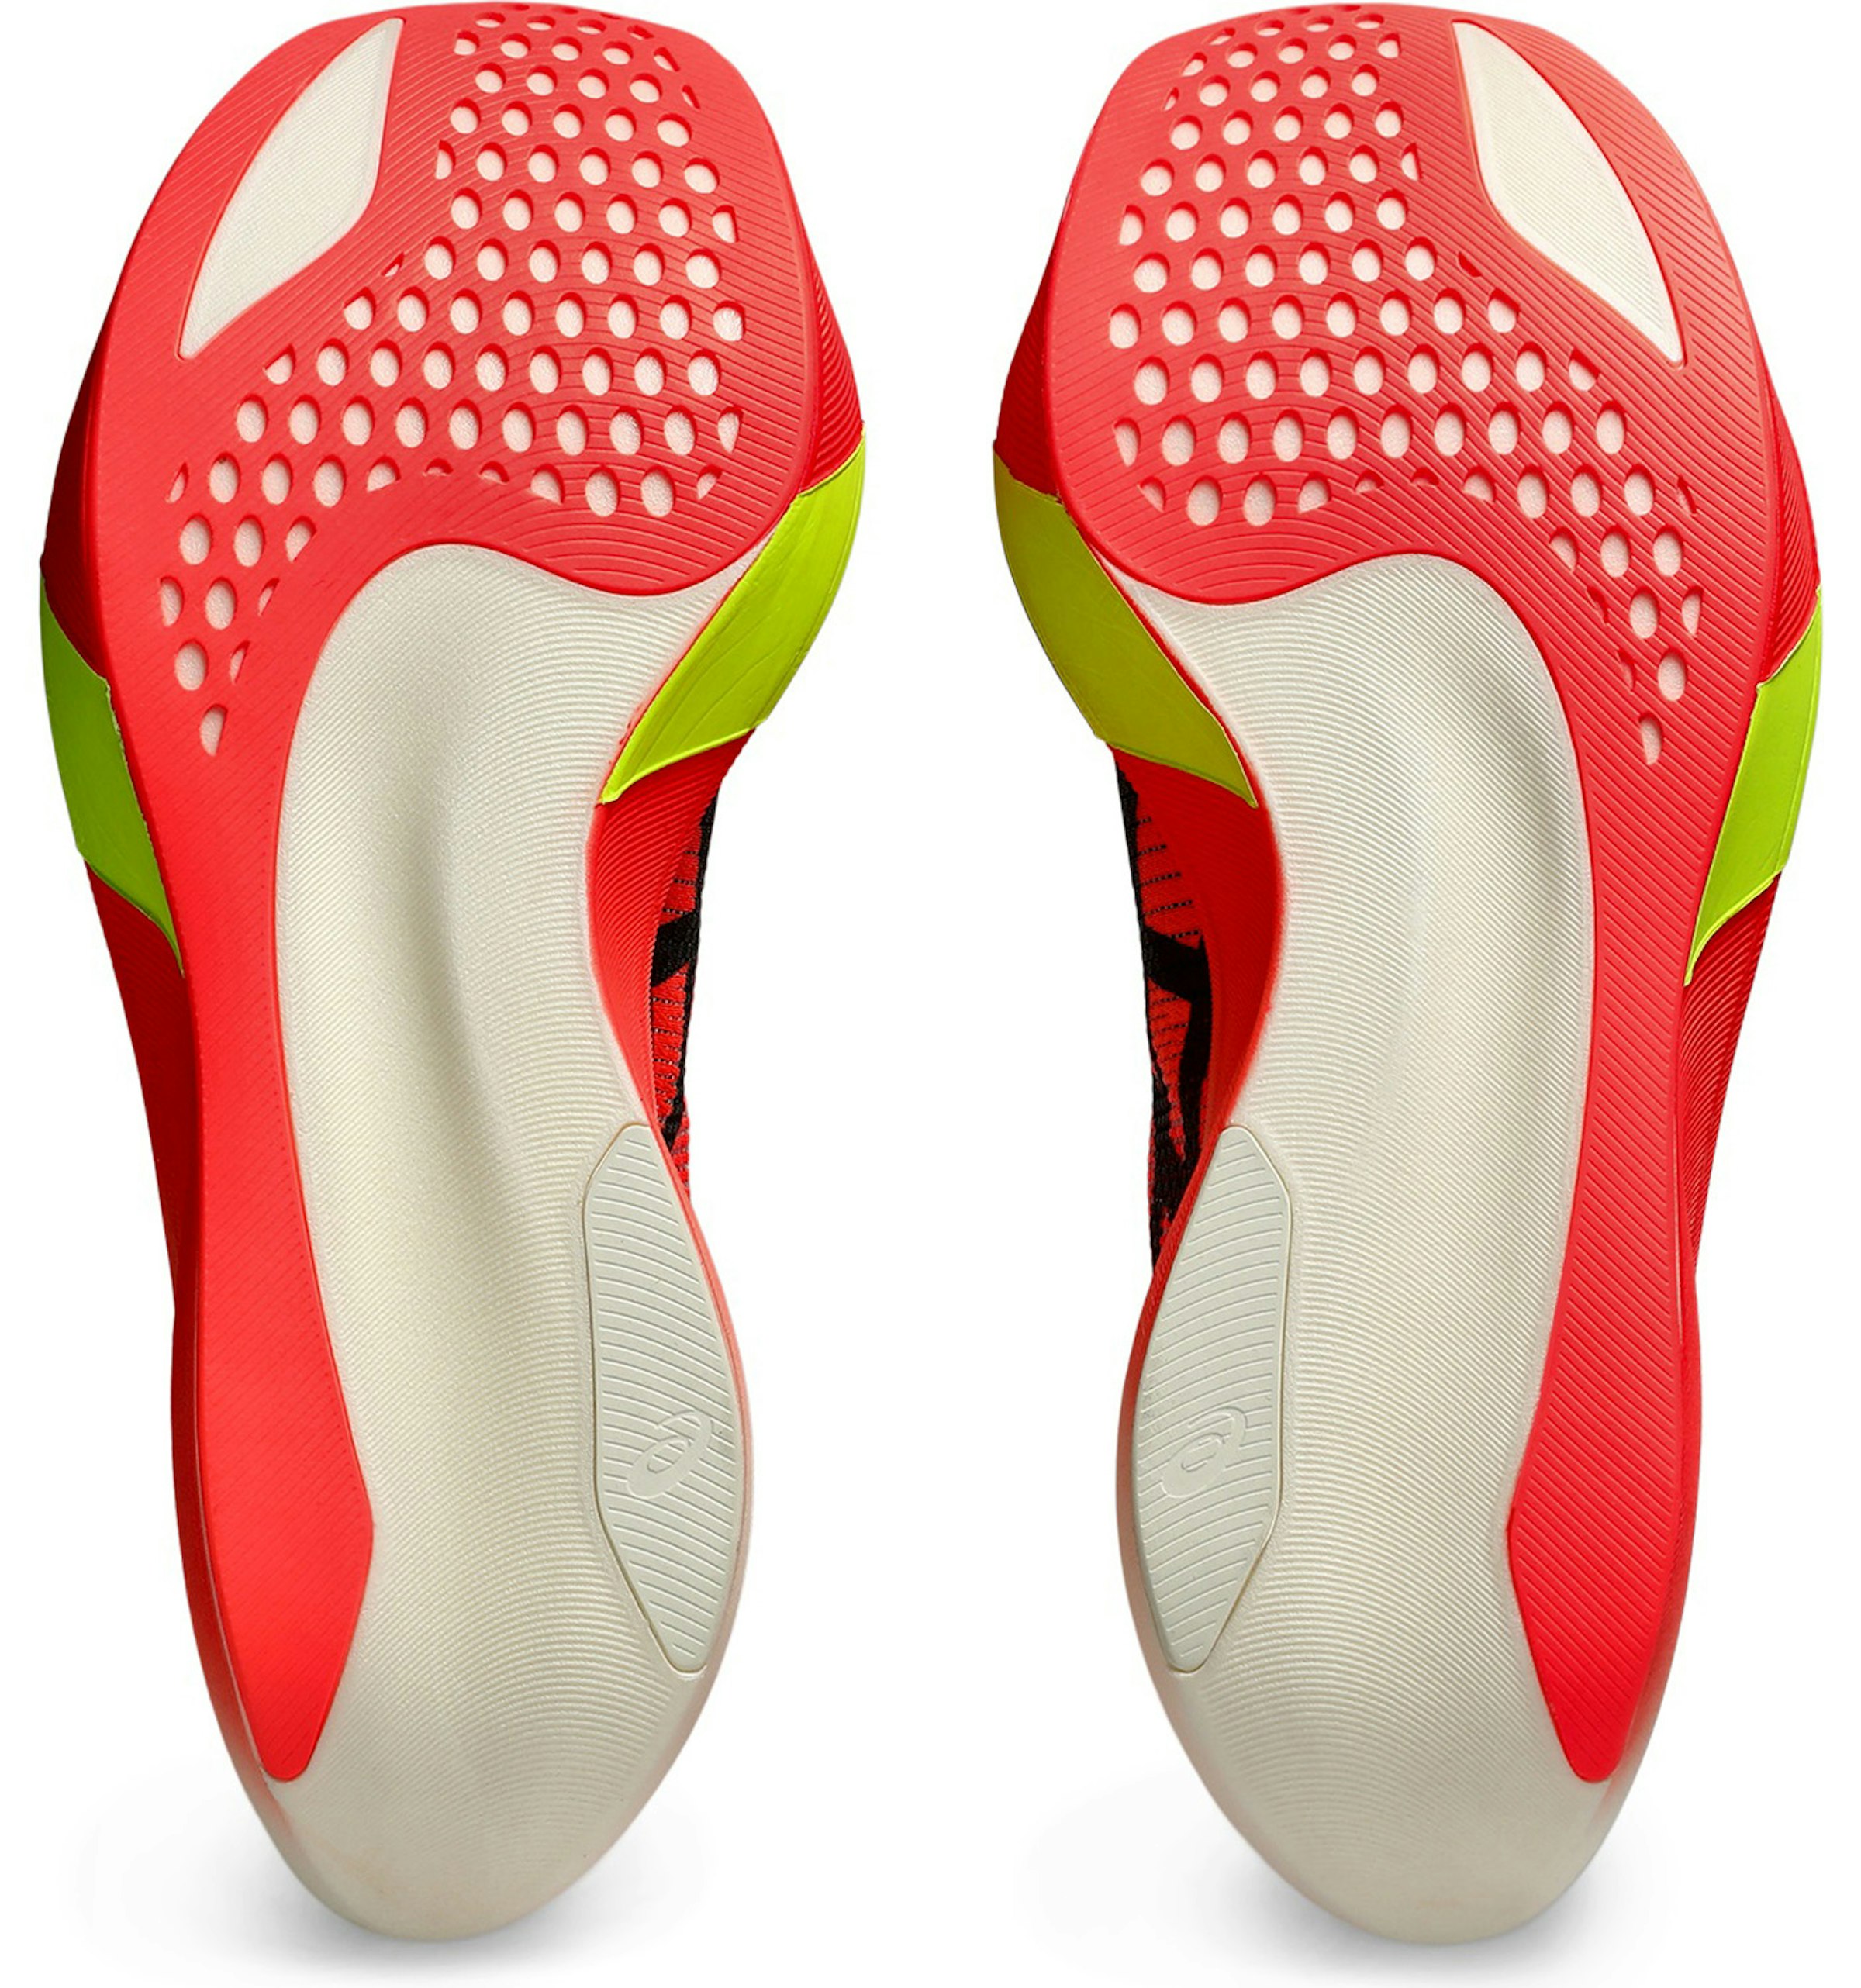 The outsole of the 'SKY PARIS'. The outside of the forefoot is hollowed out